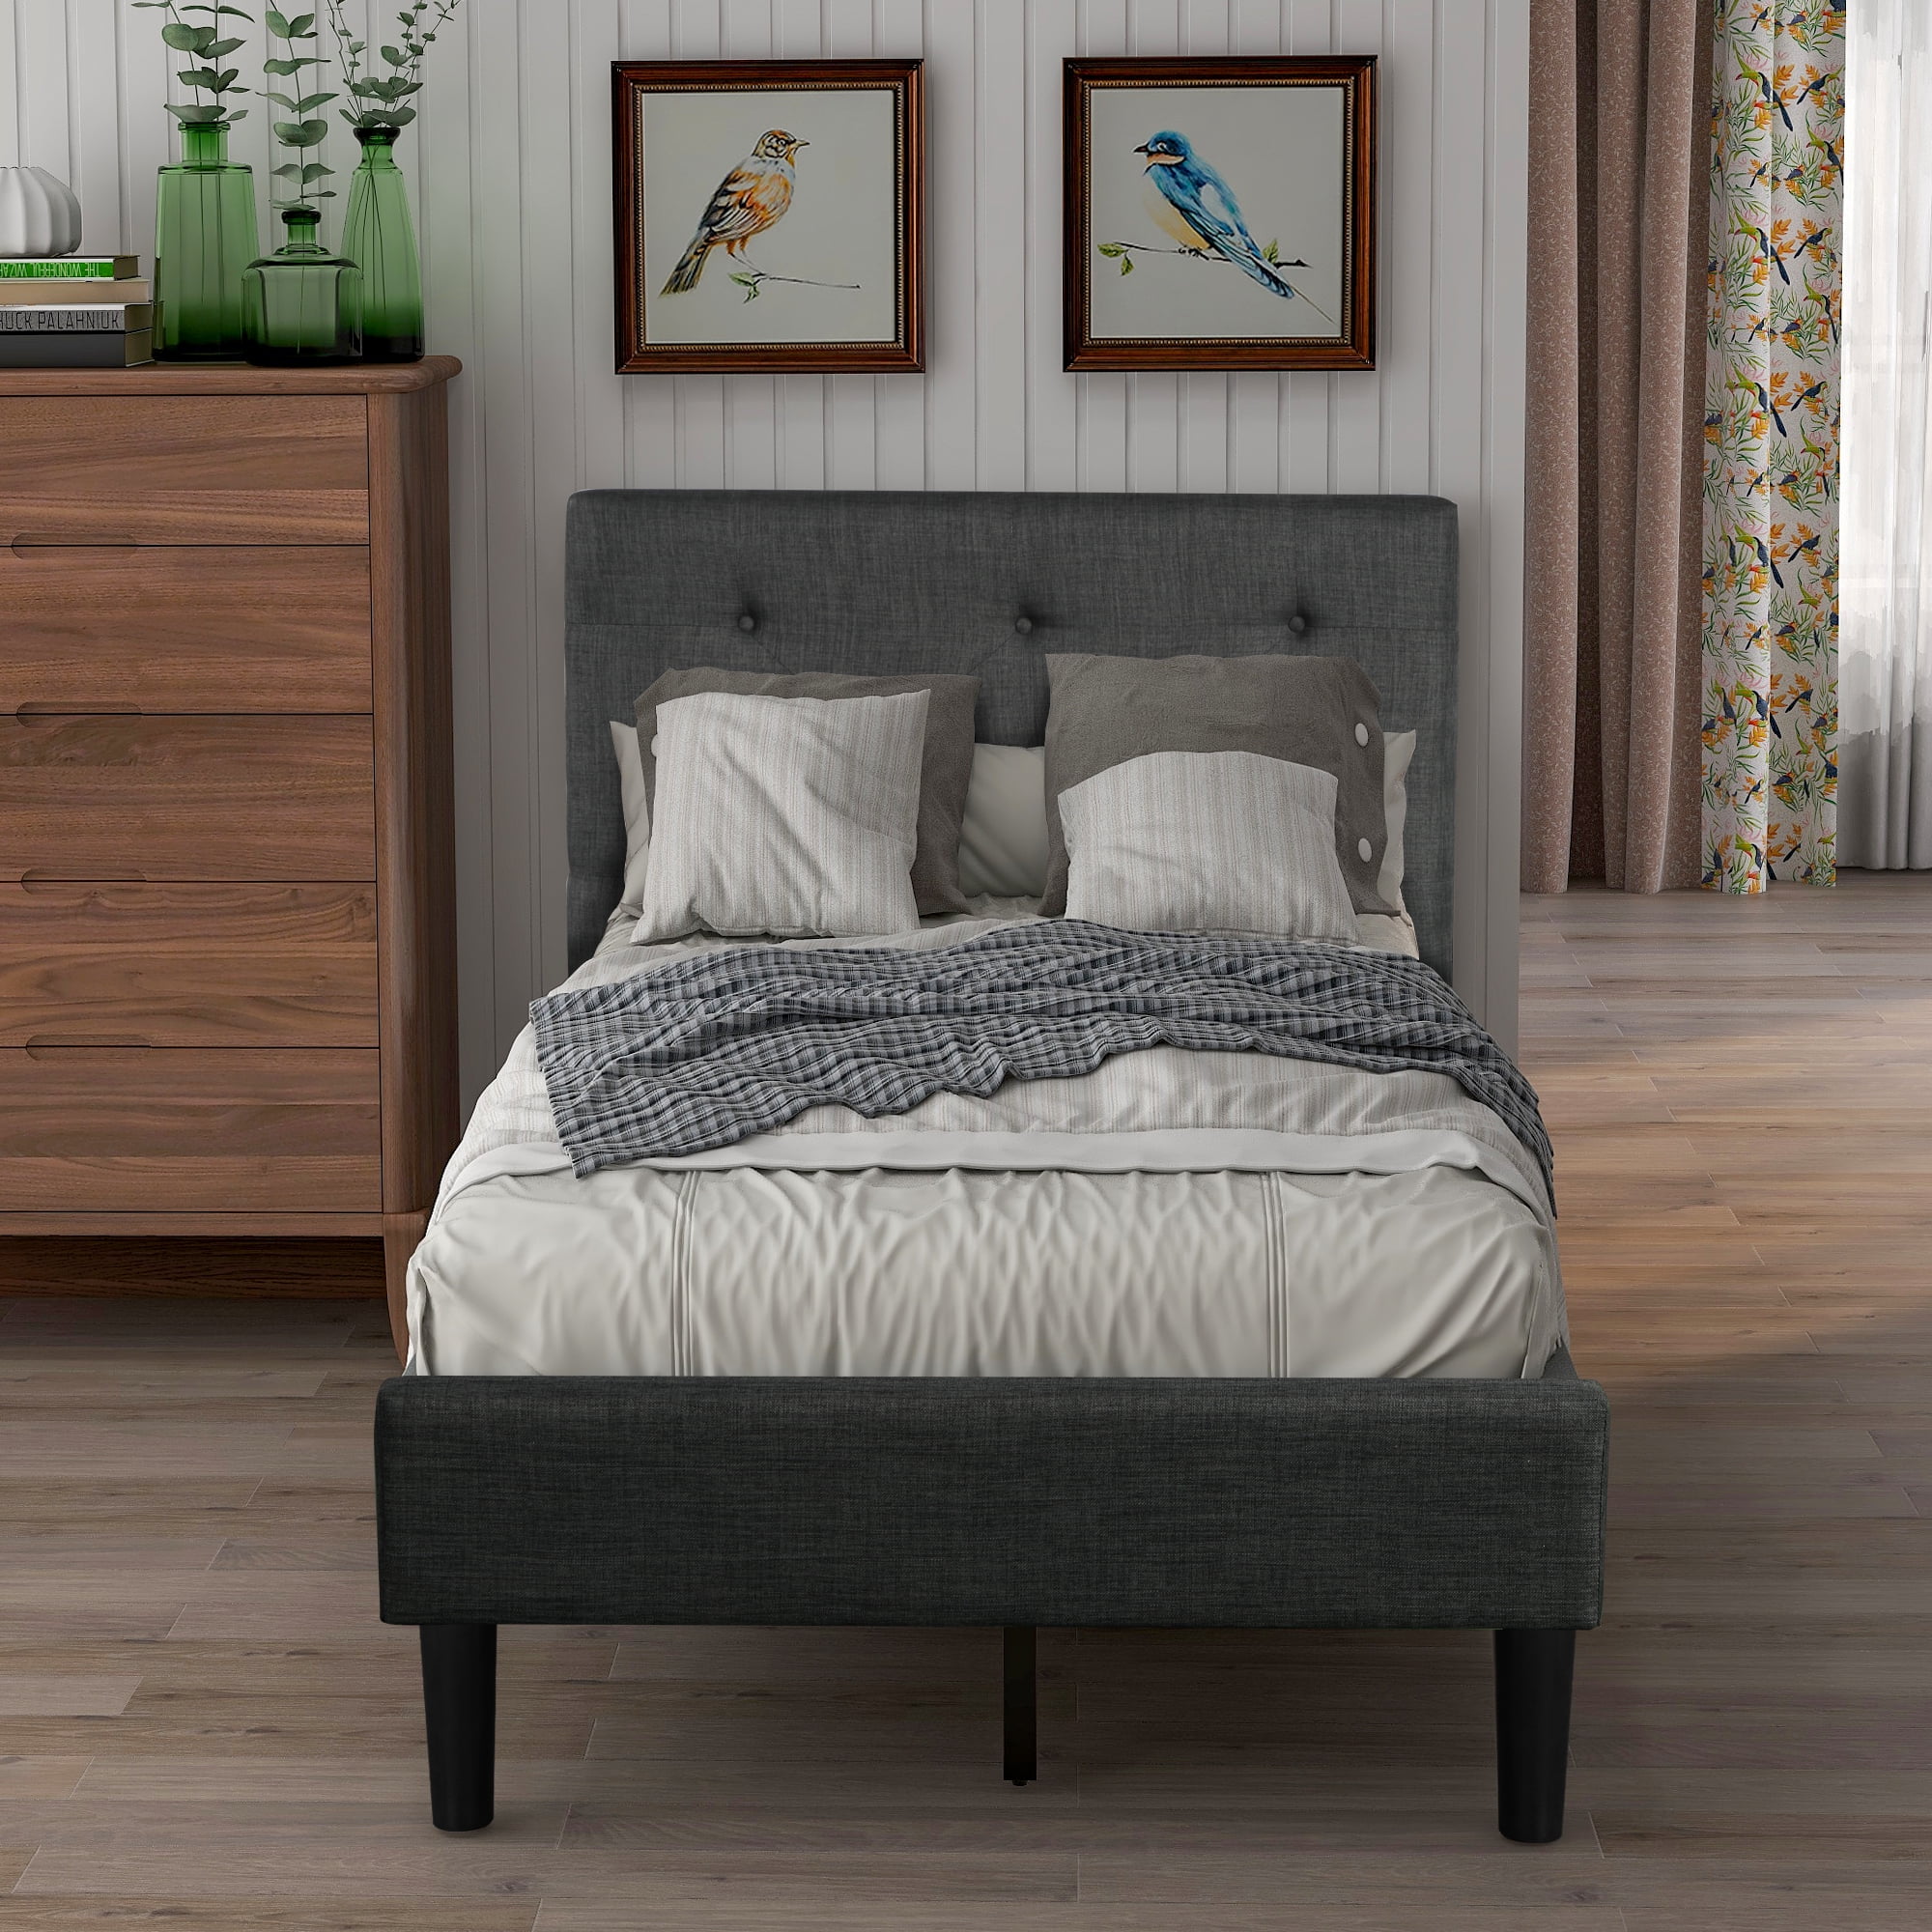 Contemporary Twin Platform Bed Frame, Contemporary Twin Bed